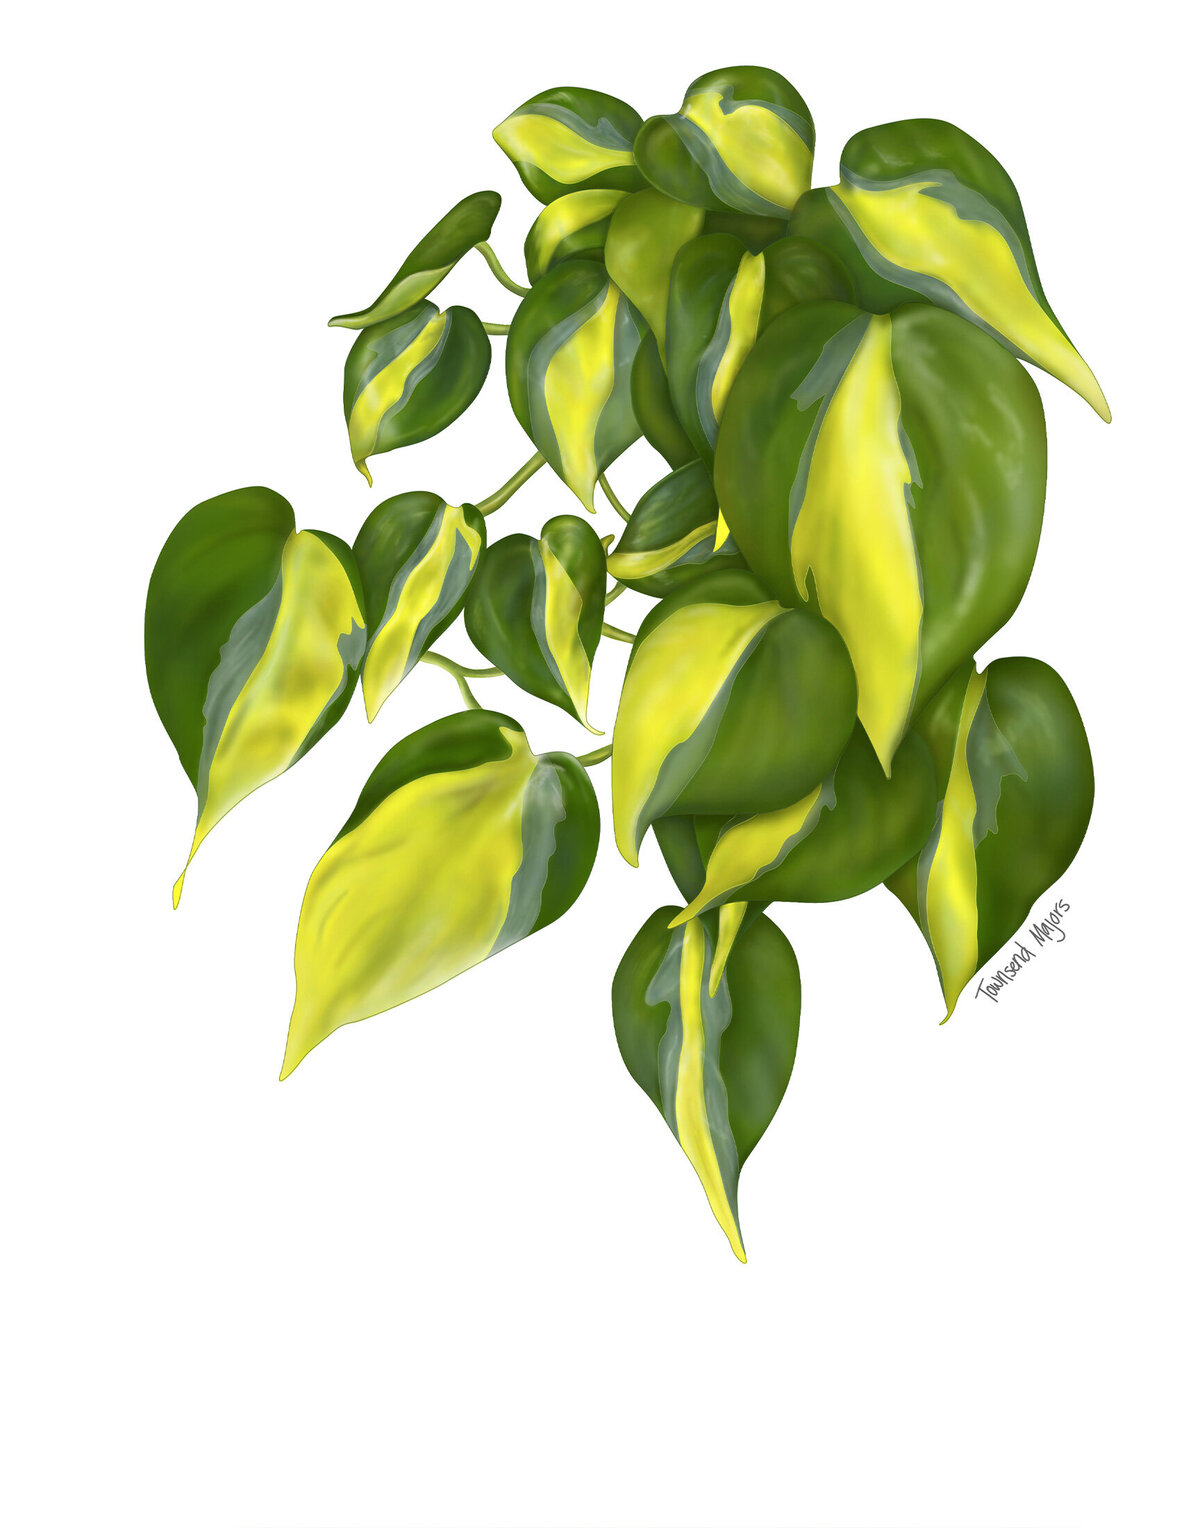 Townsend Majors' illustration of a brasil philodendron plant